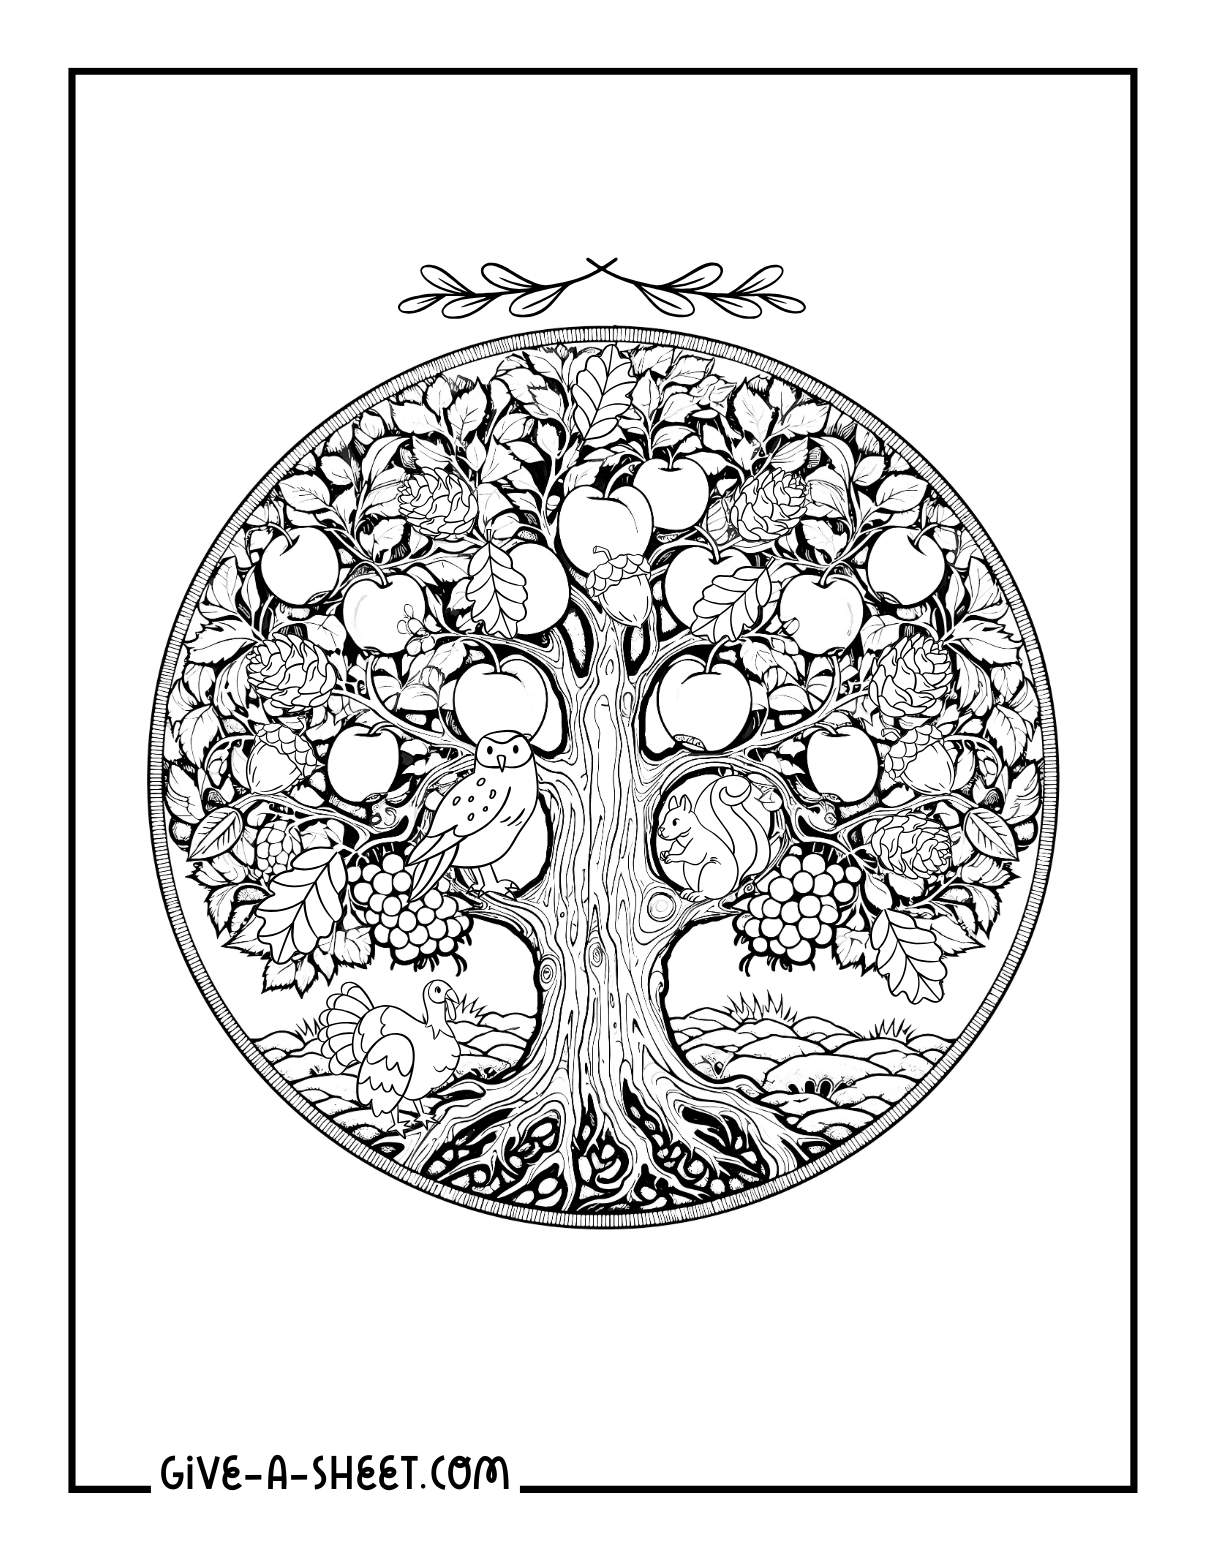 Apple tree the tree of life with animals coloring page.